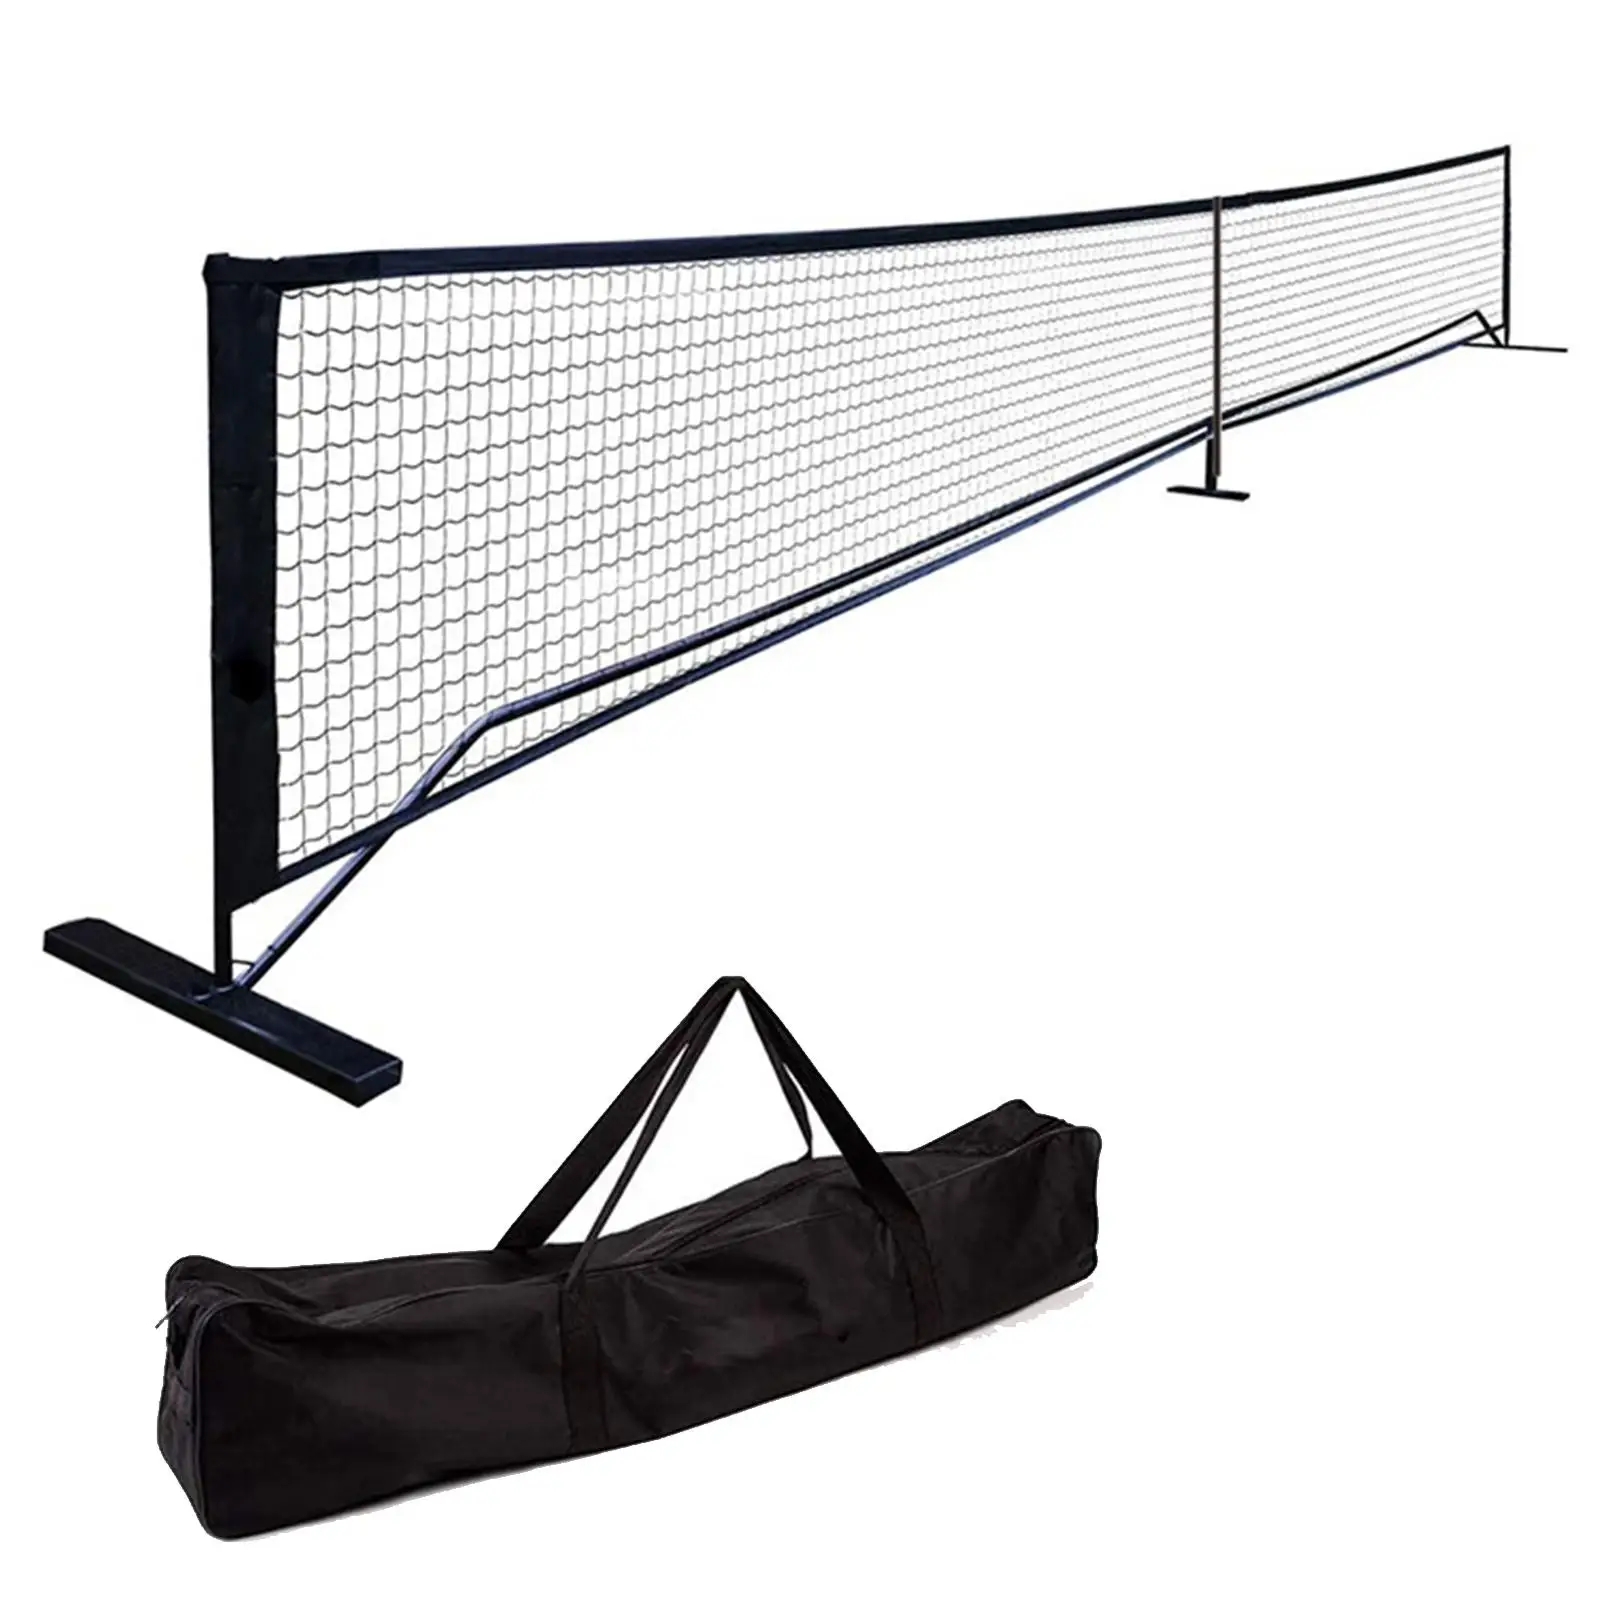 

Portable Pickleball Net Set 263.78inchx35.83inch Durable Pickleball Court Metal Frame Black Parties with Carrying Bag Easy Setup